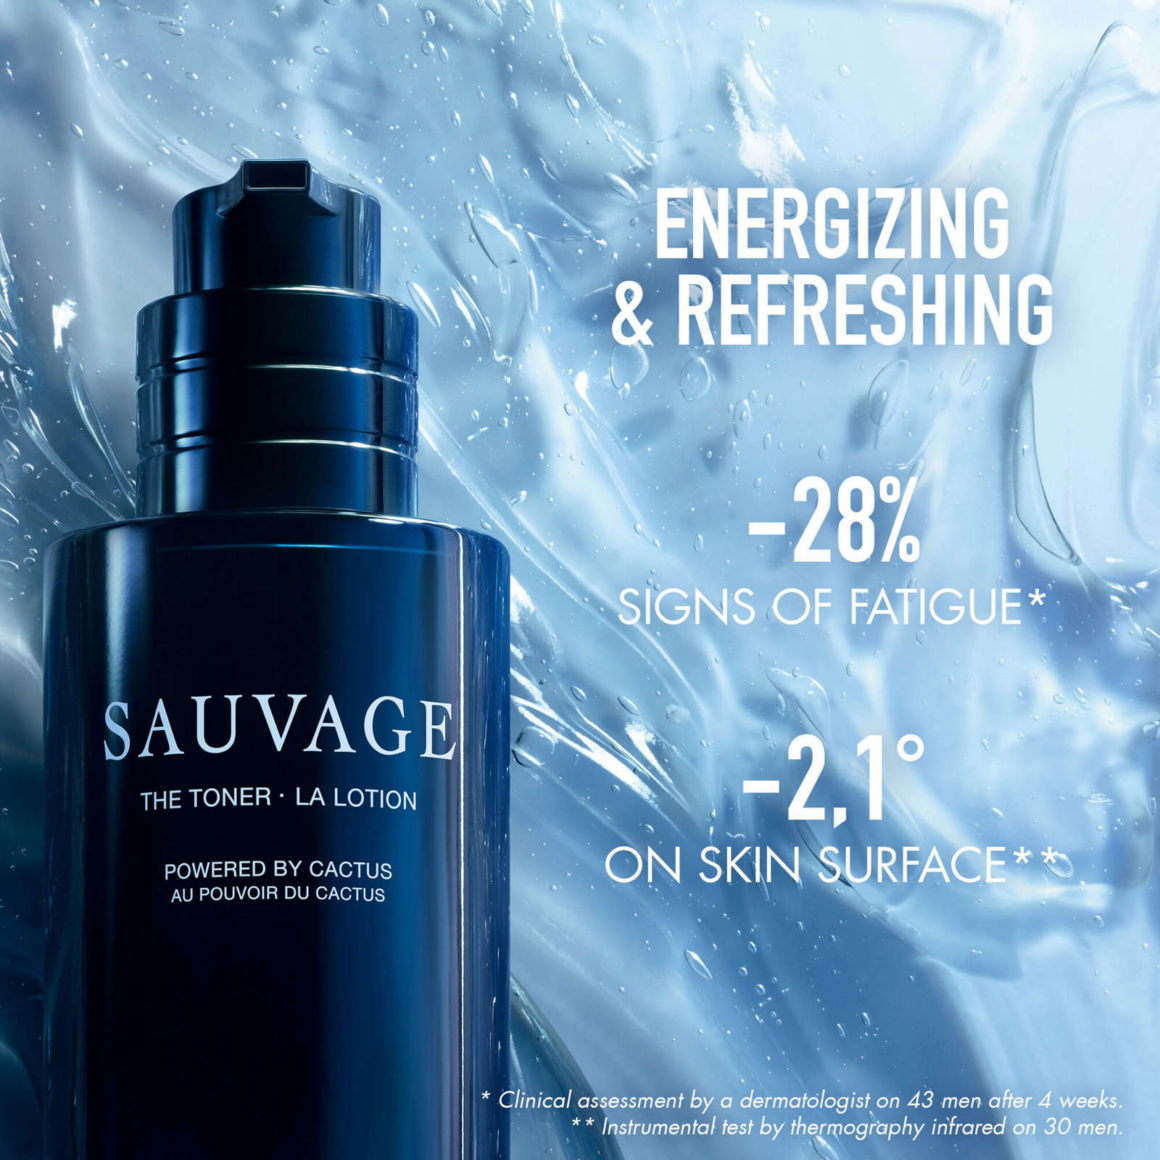 Toner facts. Dior beauty's Sauvage mencare skincare collection line made from Cactus new.